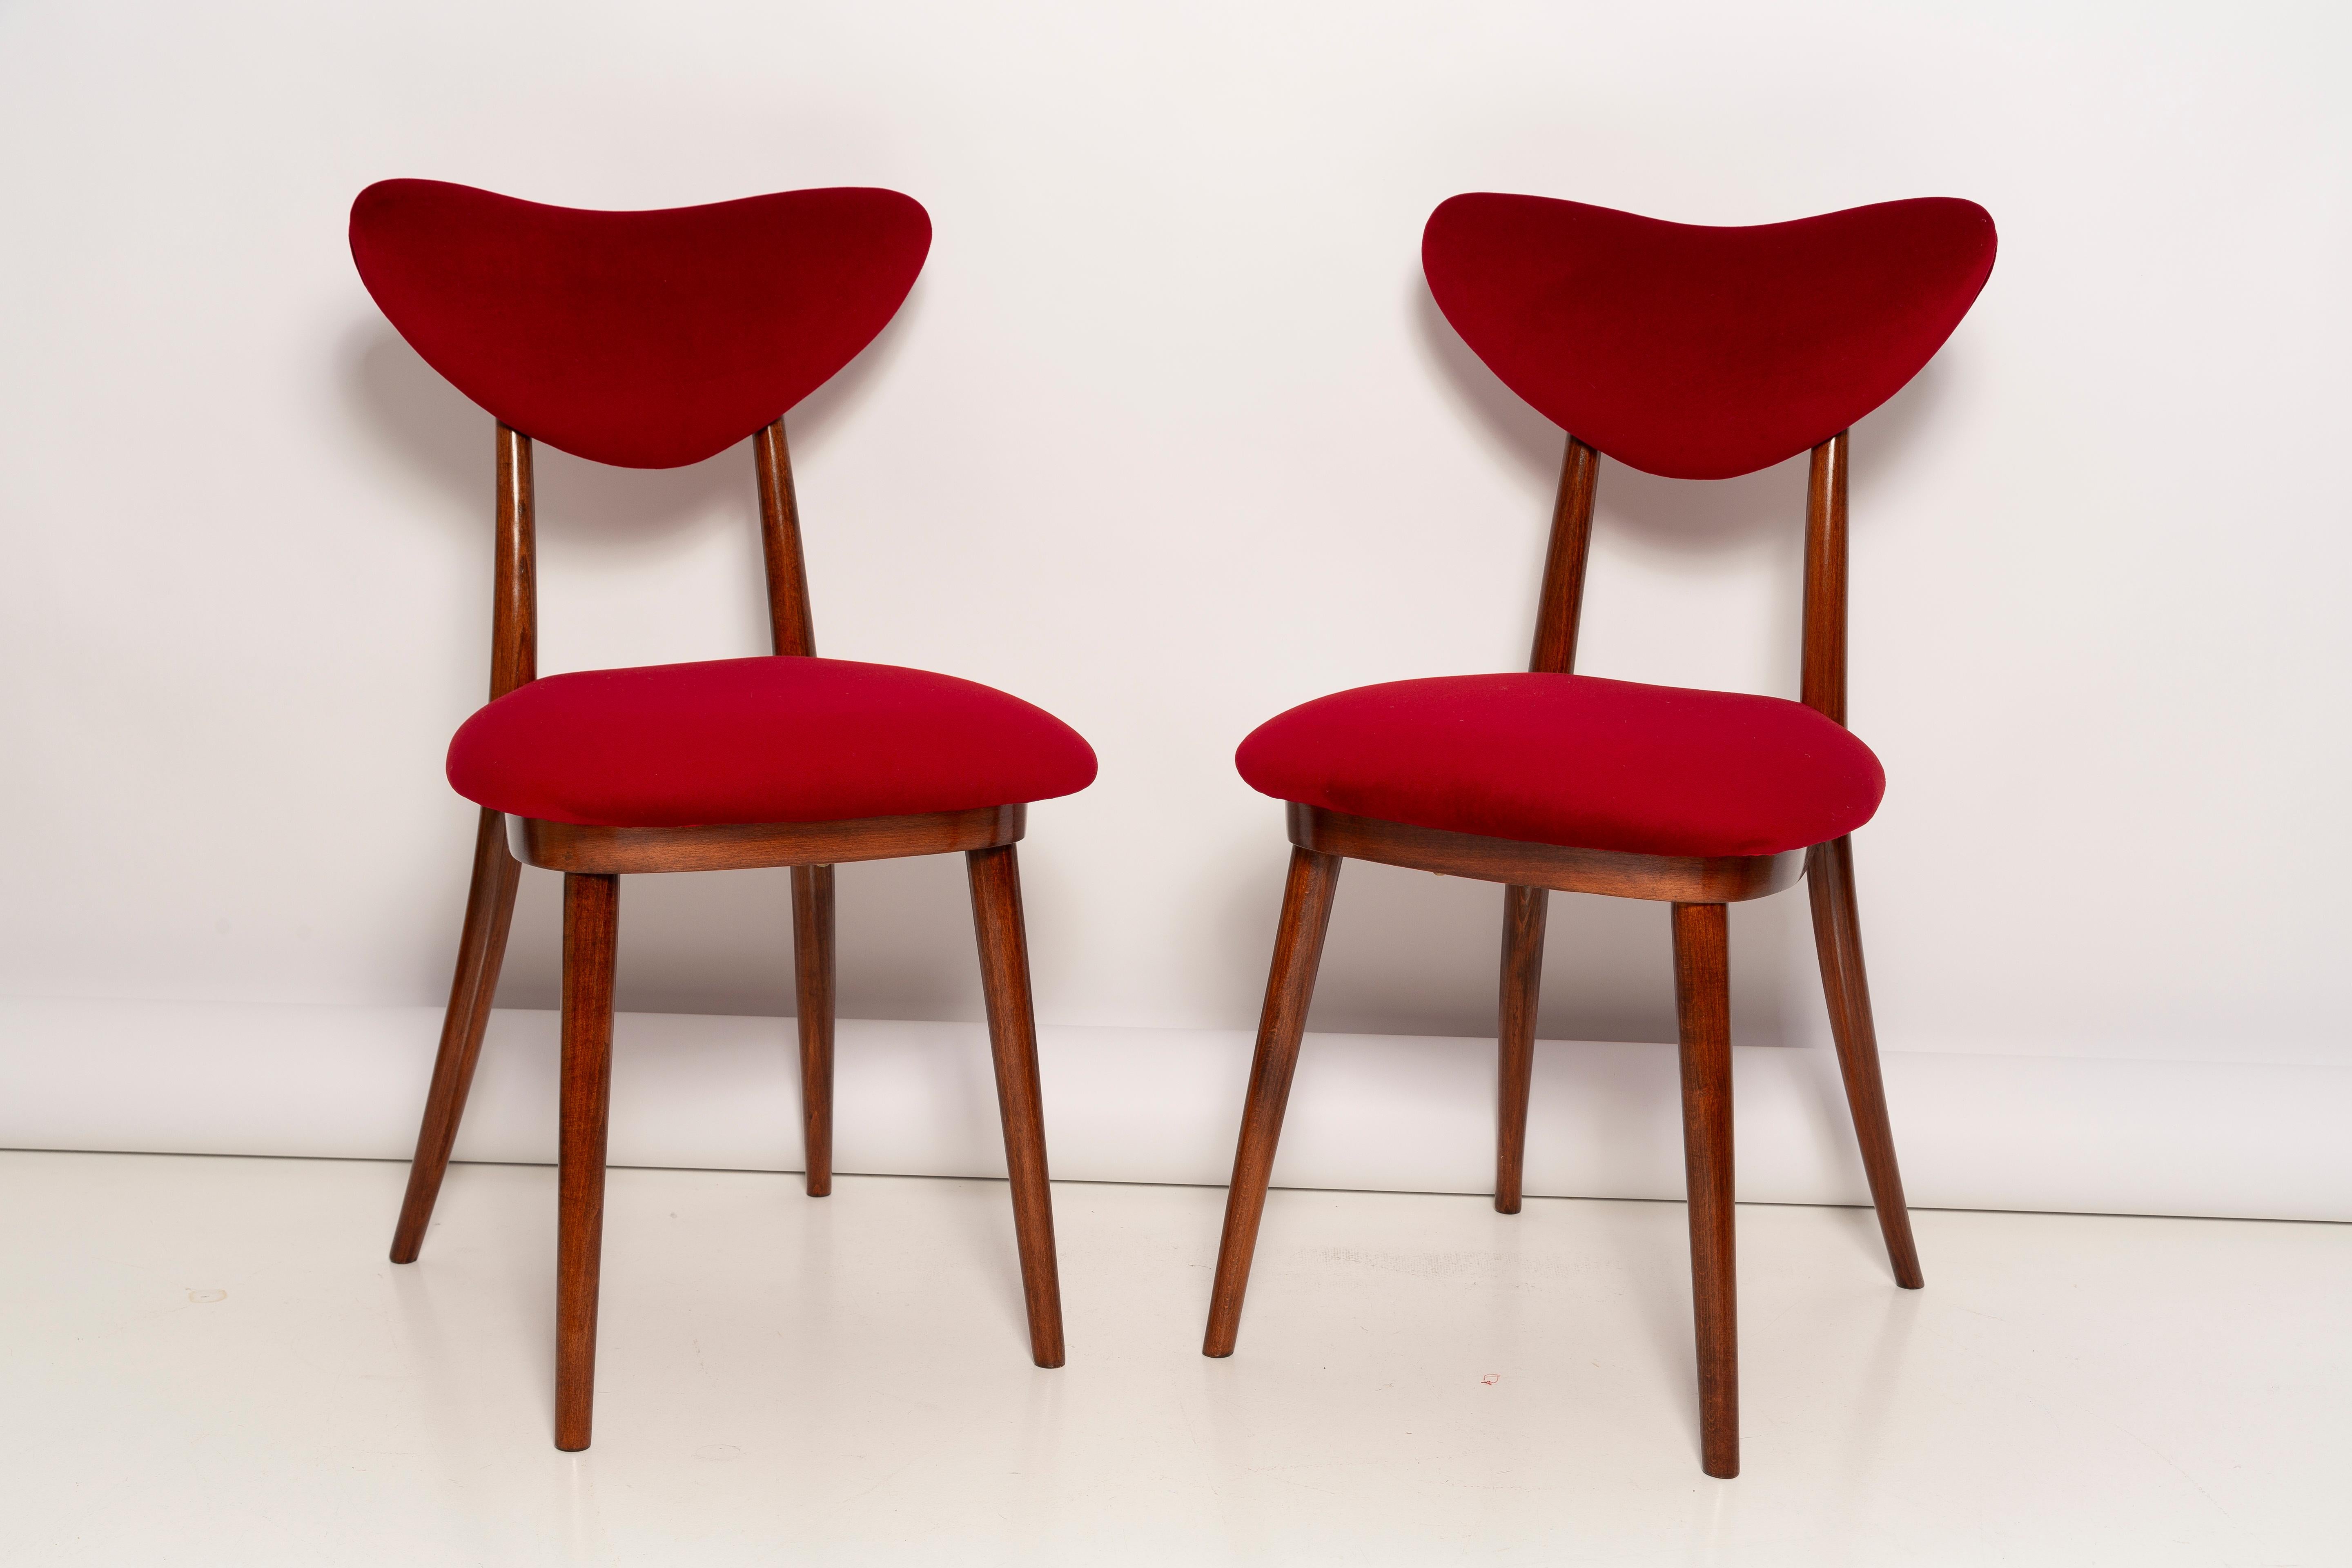 A set of 2 chairs type A5828. Colloquially called 